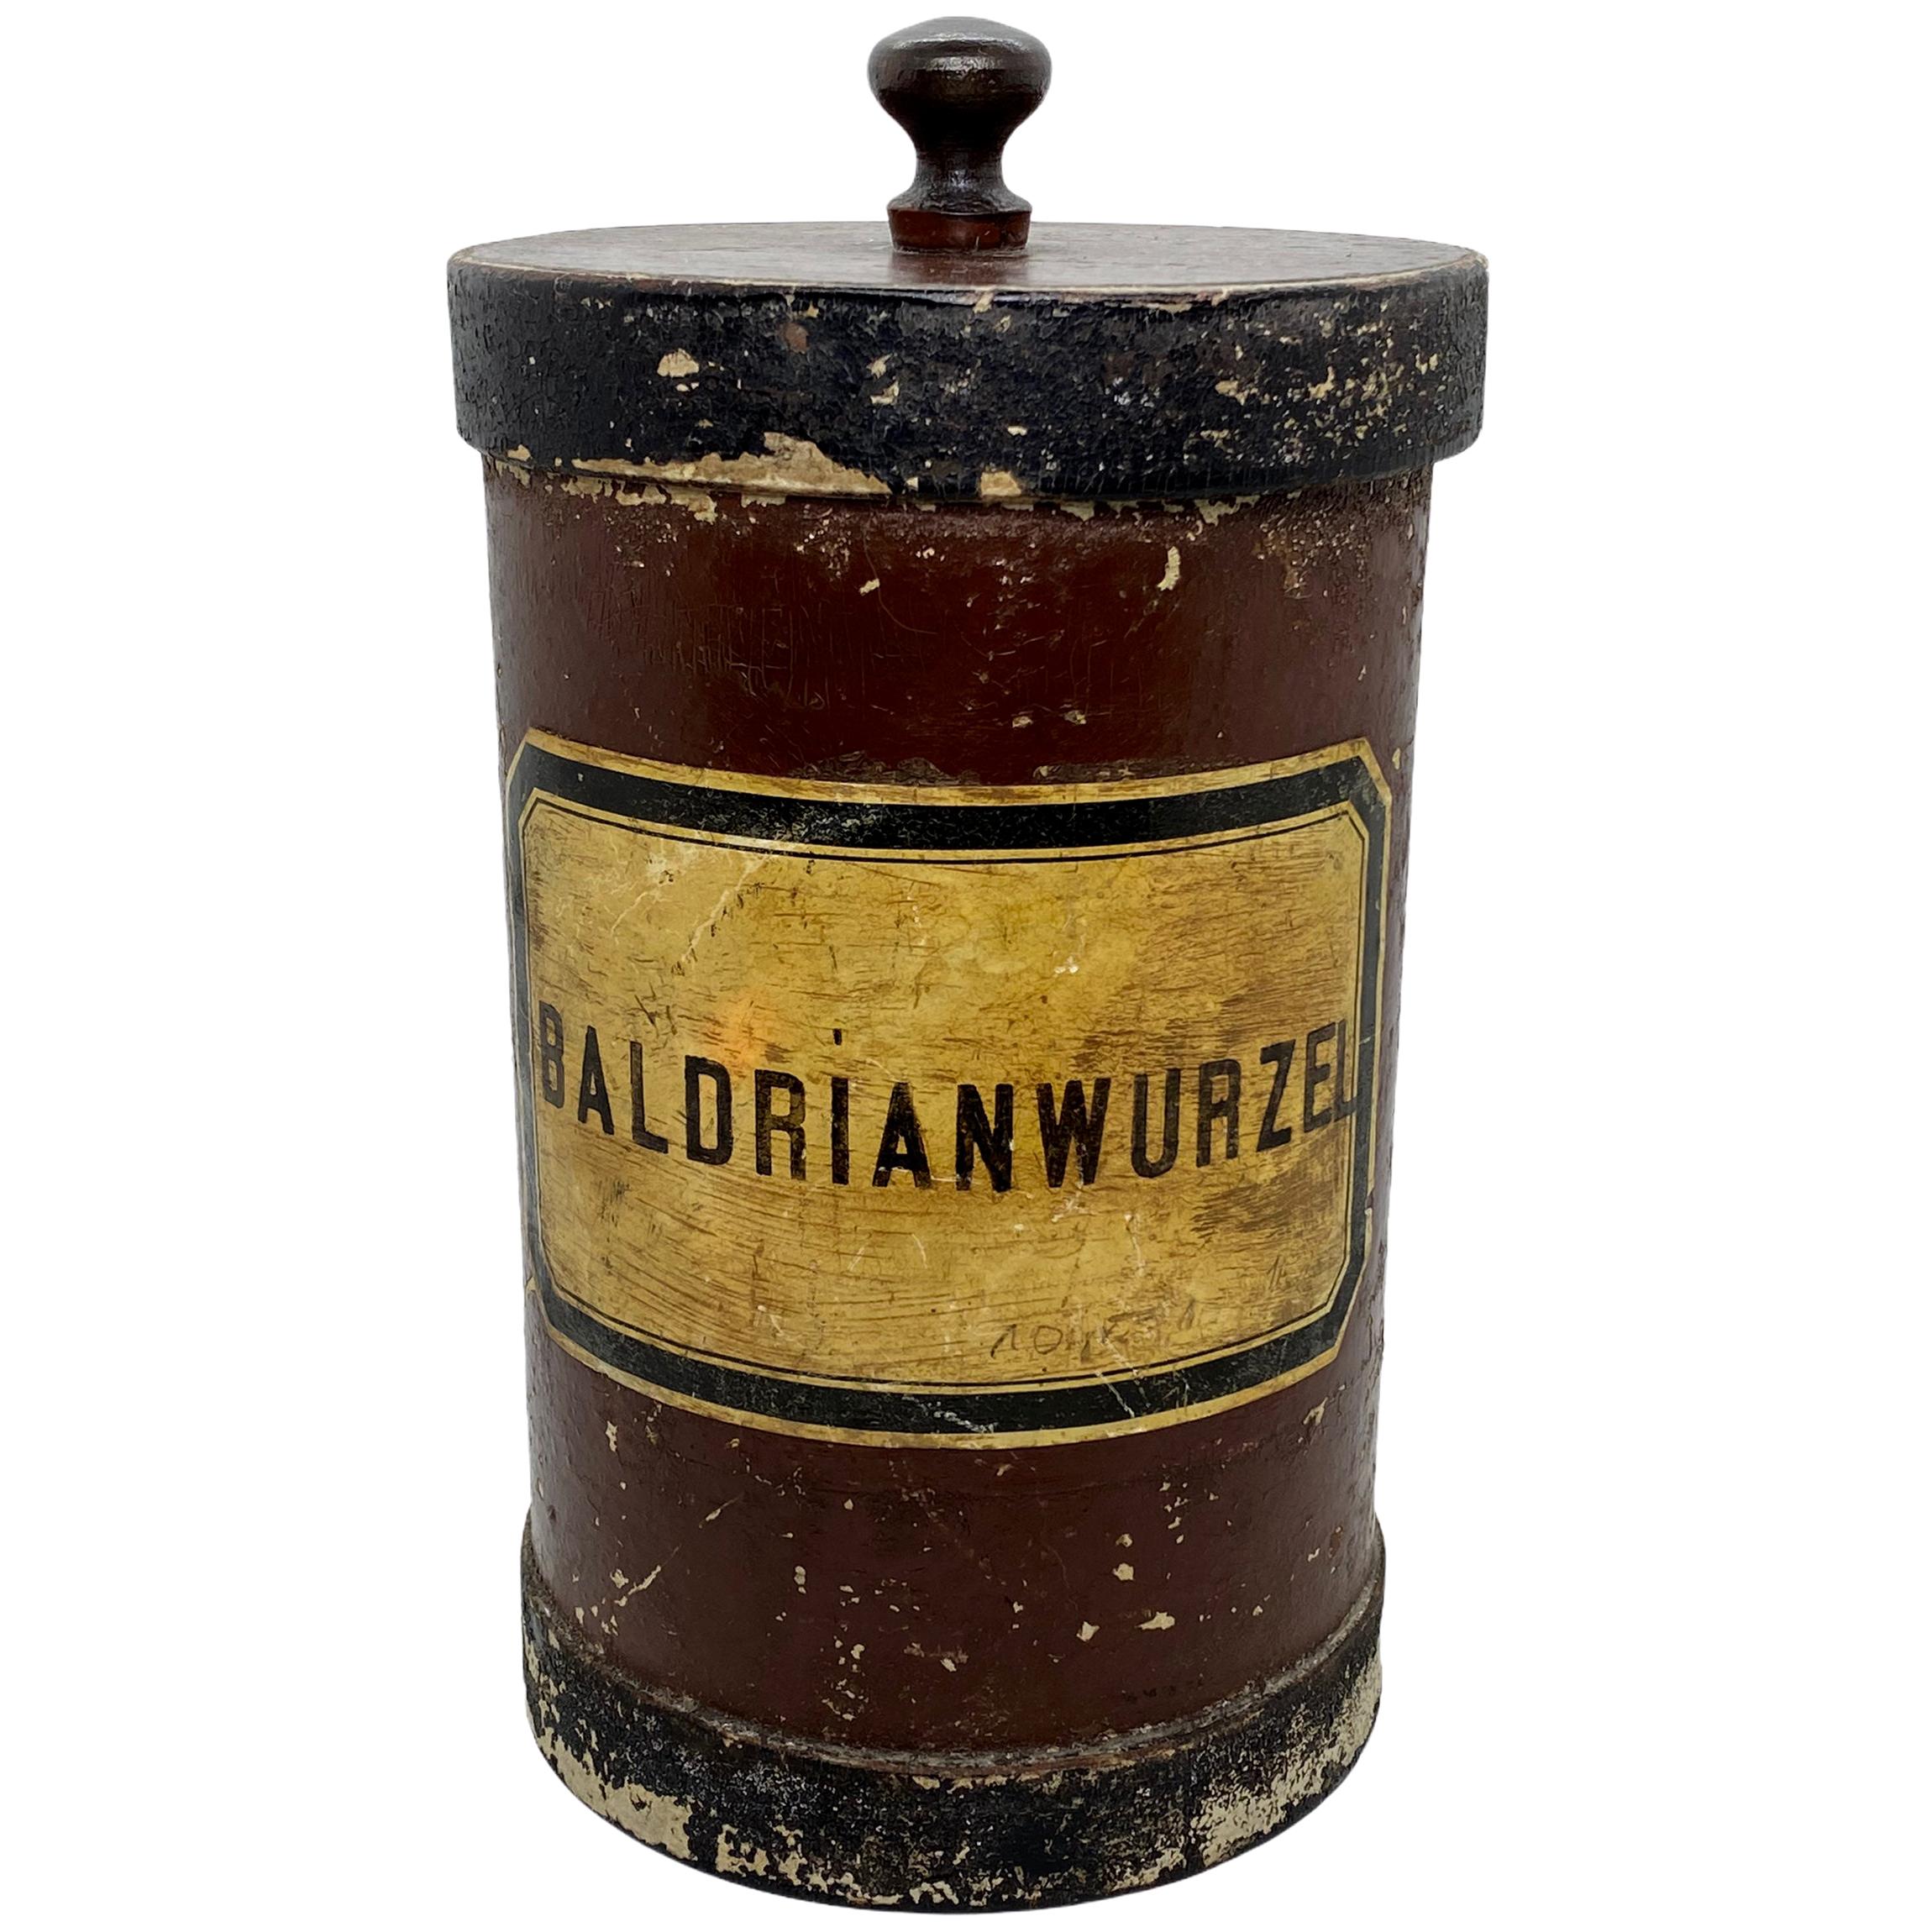 Antique Wooden and Cardboard Apothecary Pharmacy Storage Jar for Valerian Root